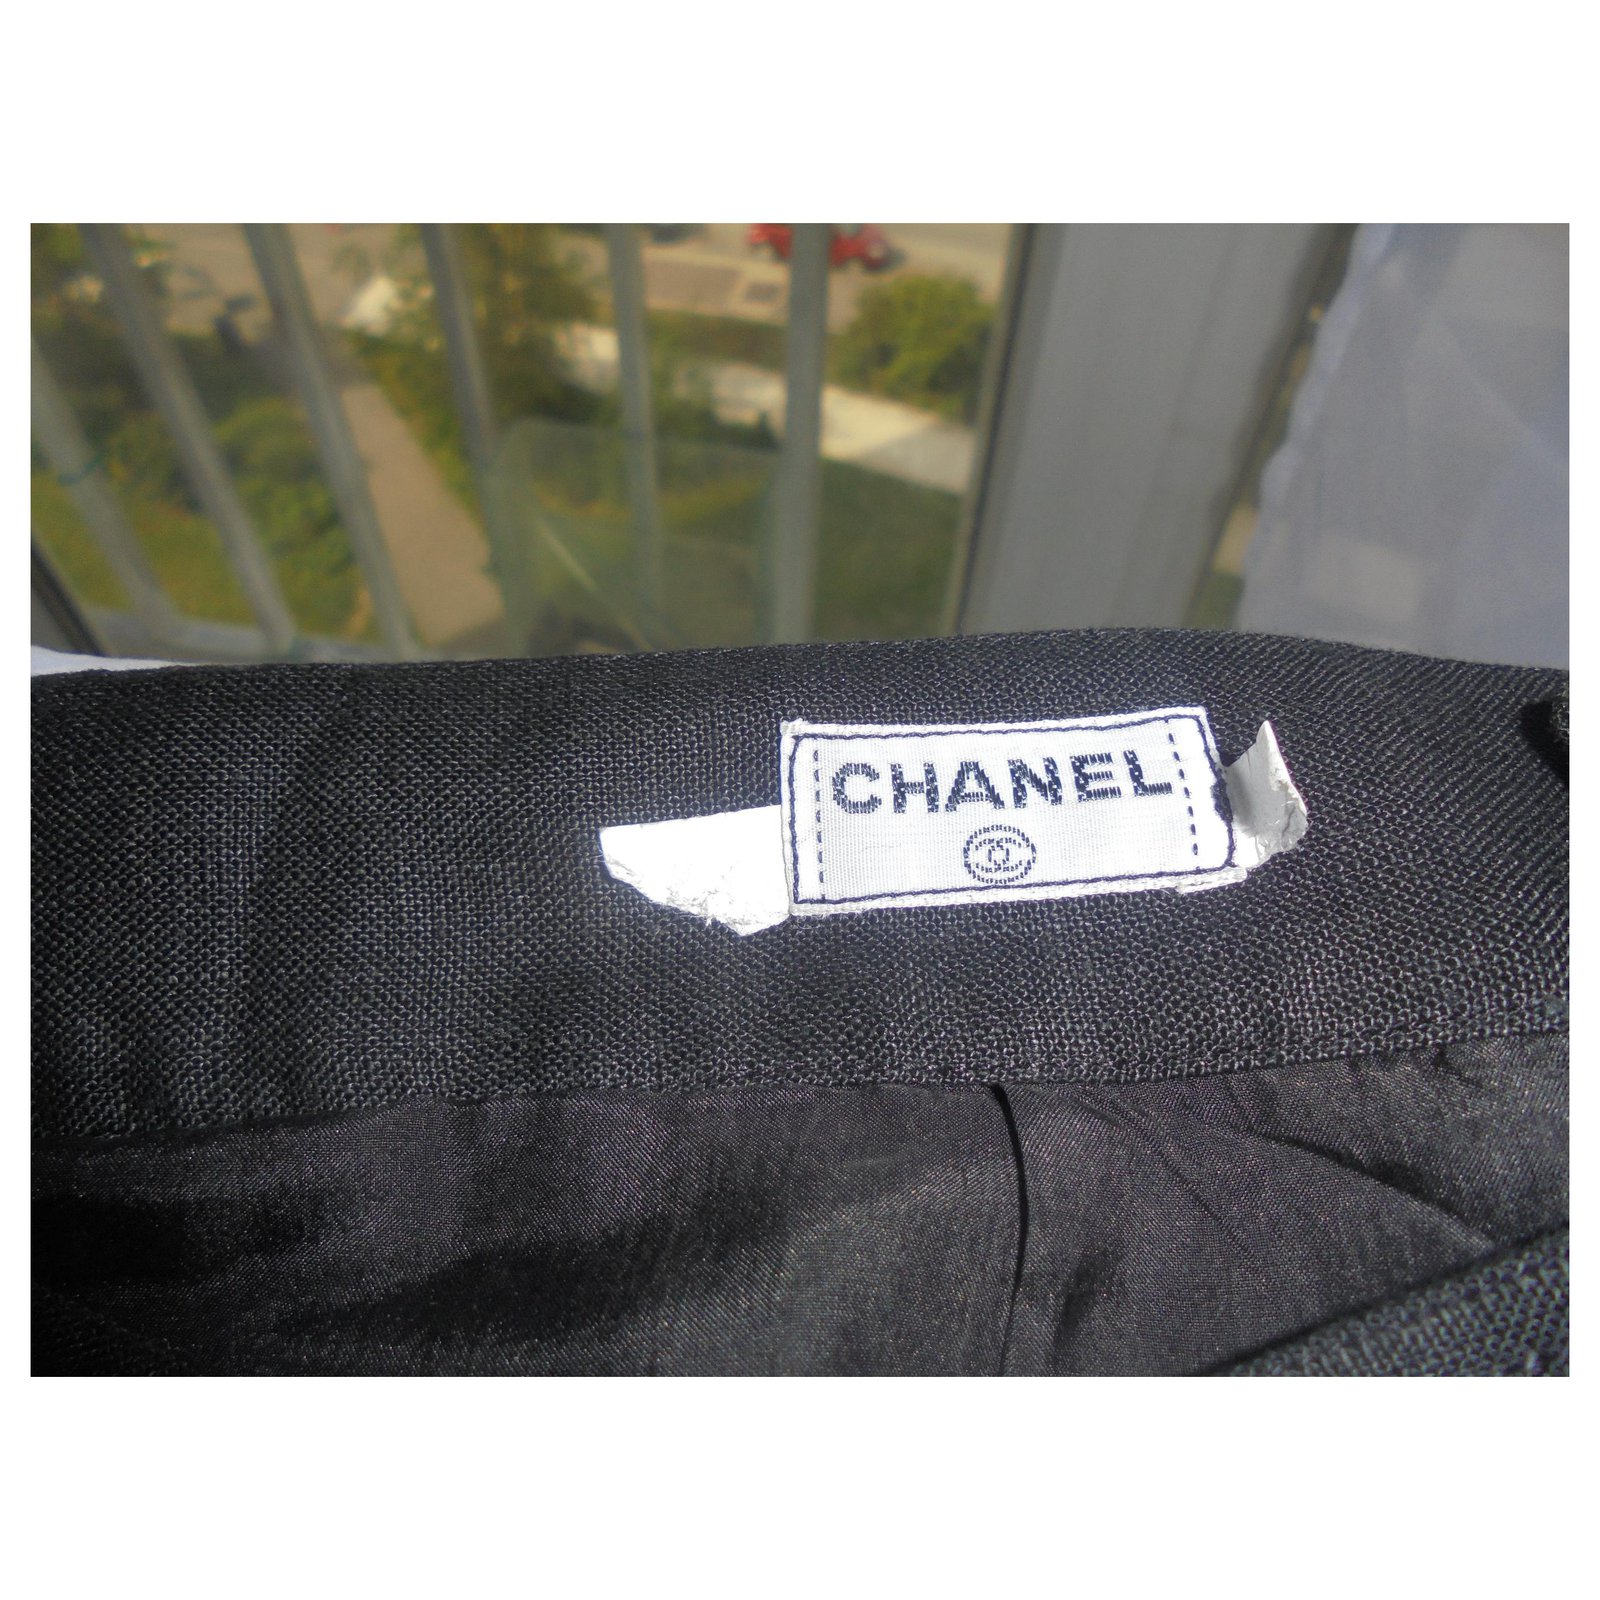 Skirts Chanel Chanel Lux Linen Skirt with Button Jewelry Bag Hand Size 36 EU